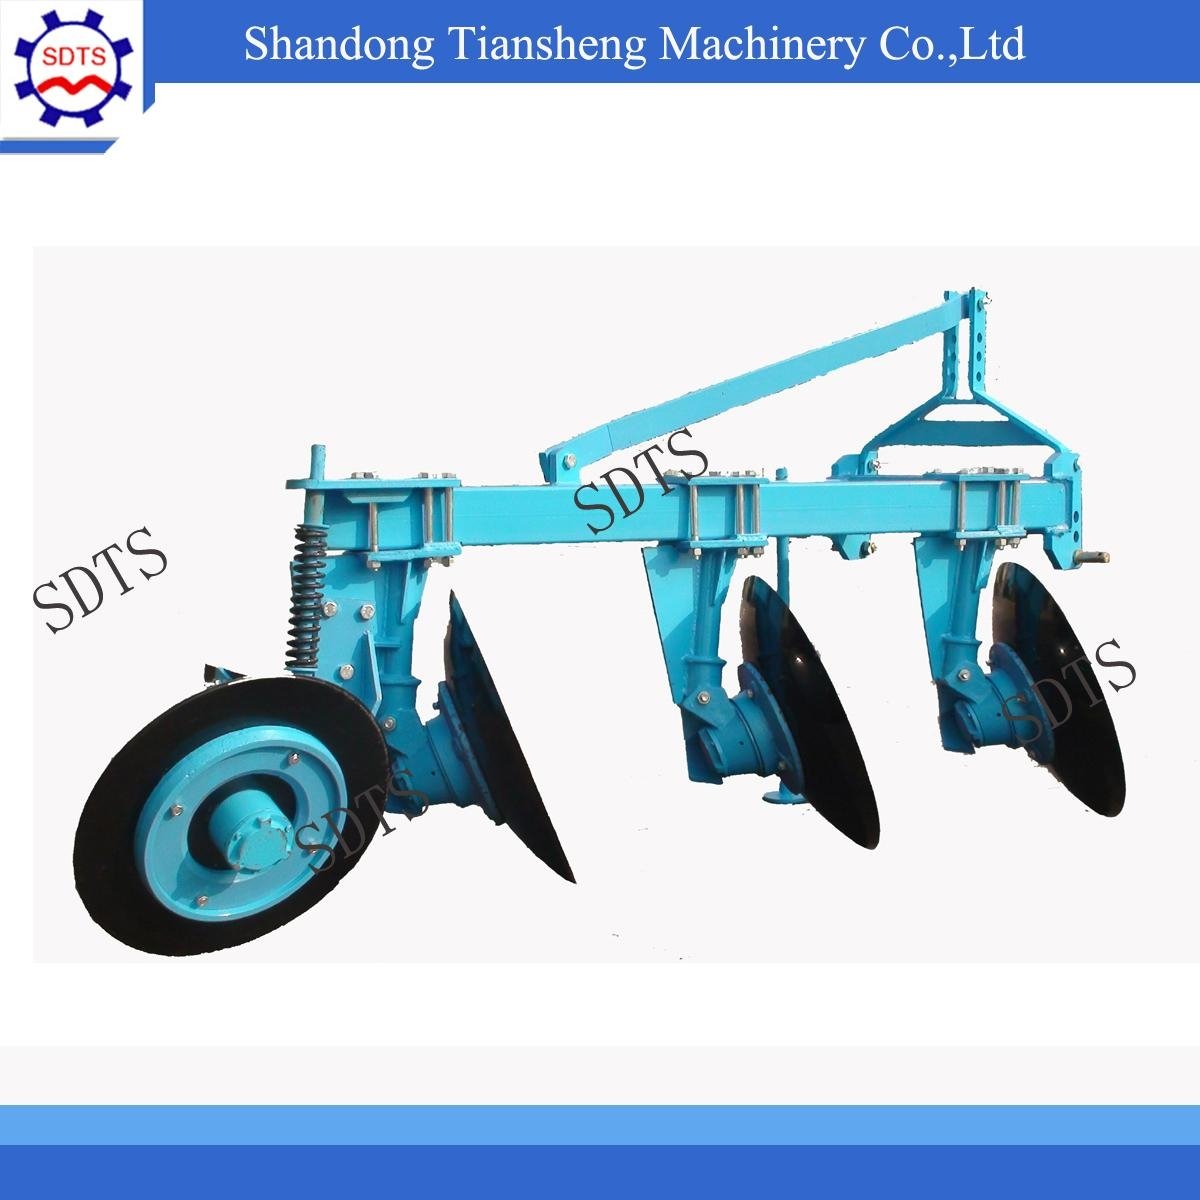 1LYT-325 Mouldboard disc plow plough for agriculture machinery and tractors